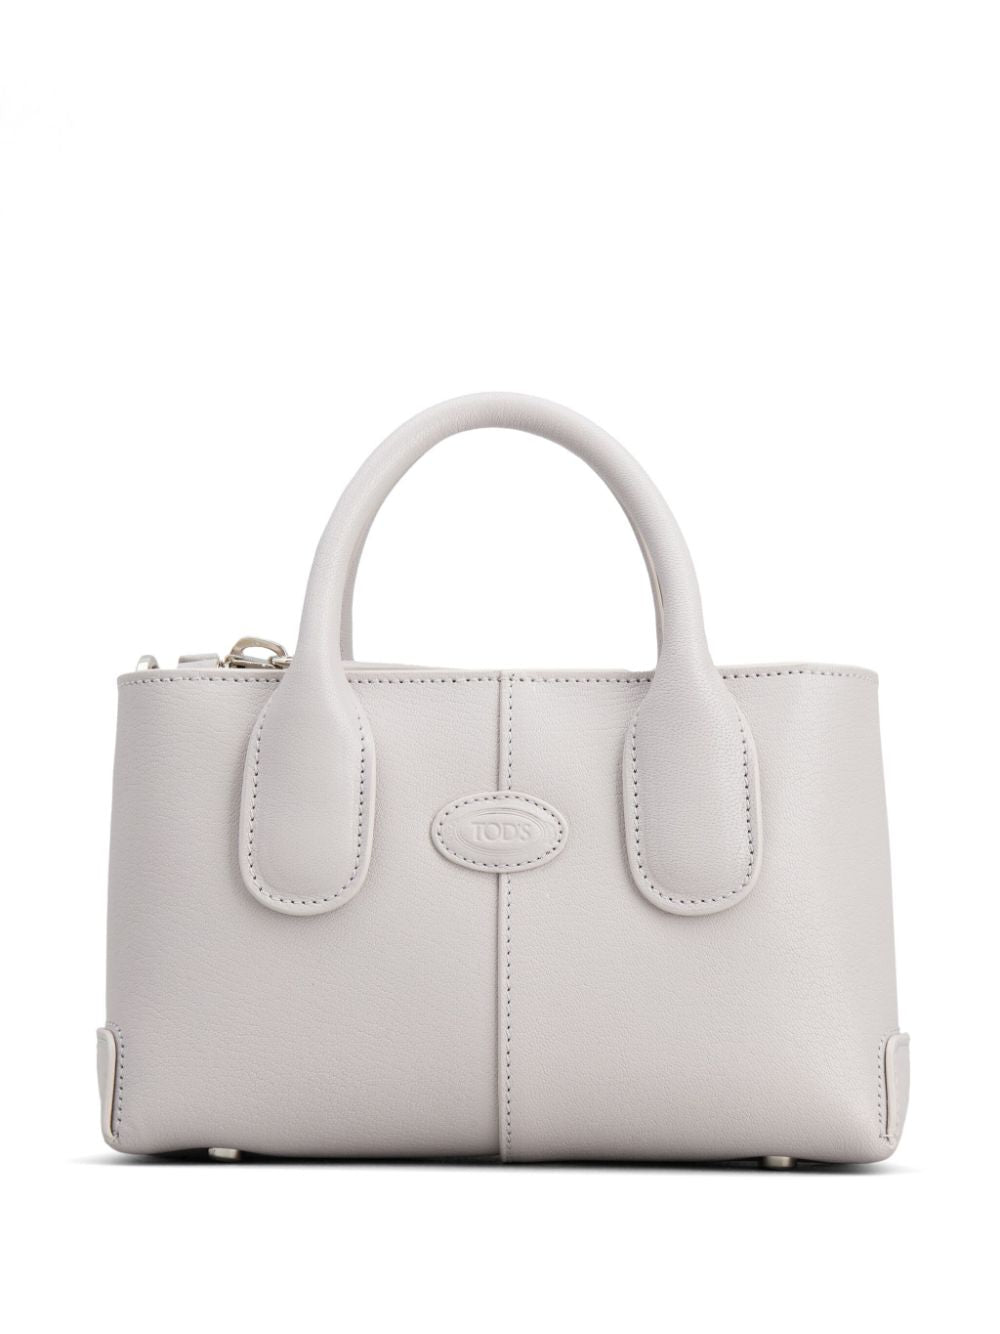 TOD'S Mini Gray Leather Handbag with Detachable Strap and Silver-Tone Accents